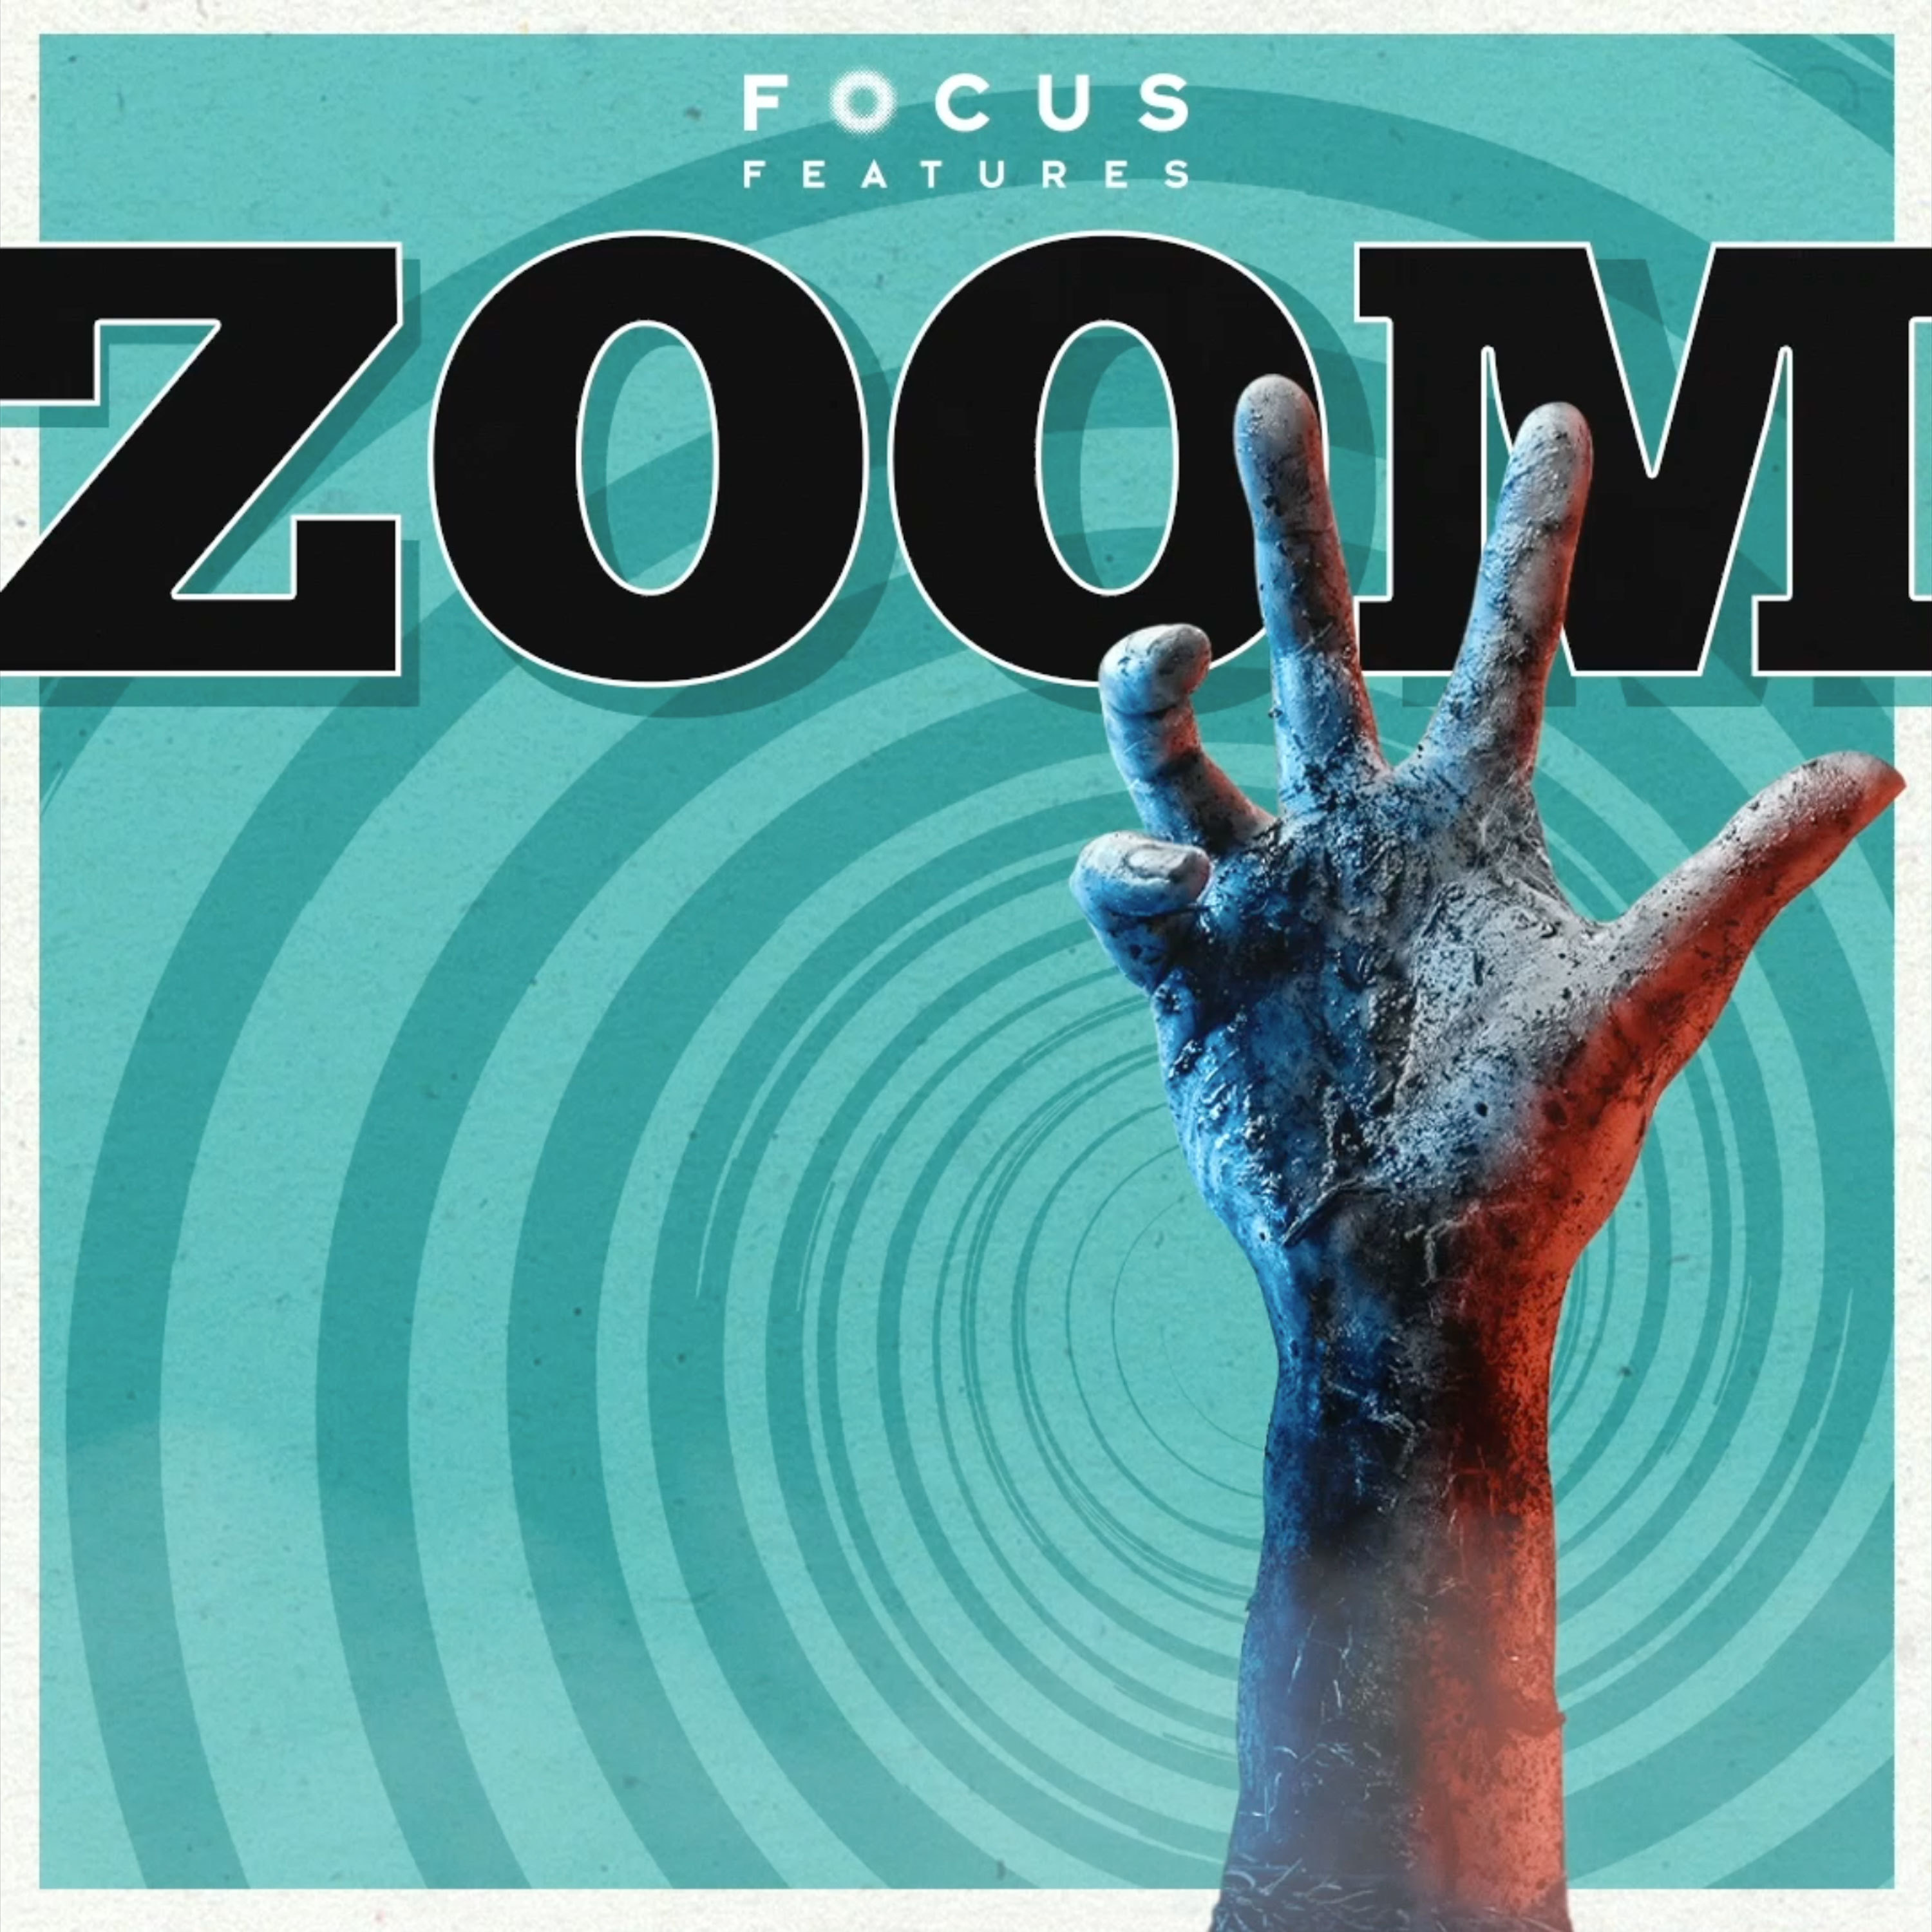 New Episode of ZOOM Coming Soon!